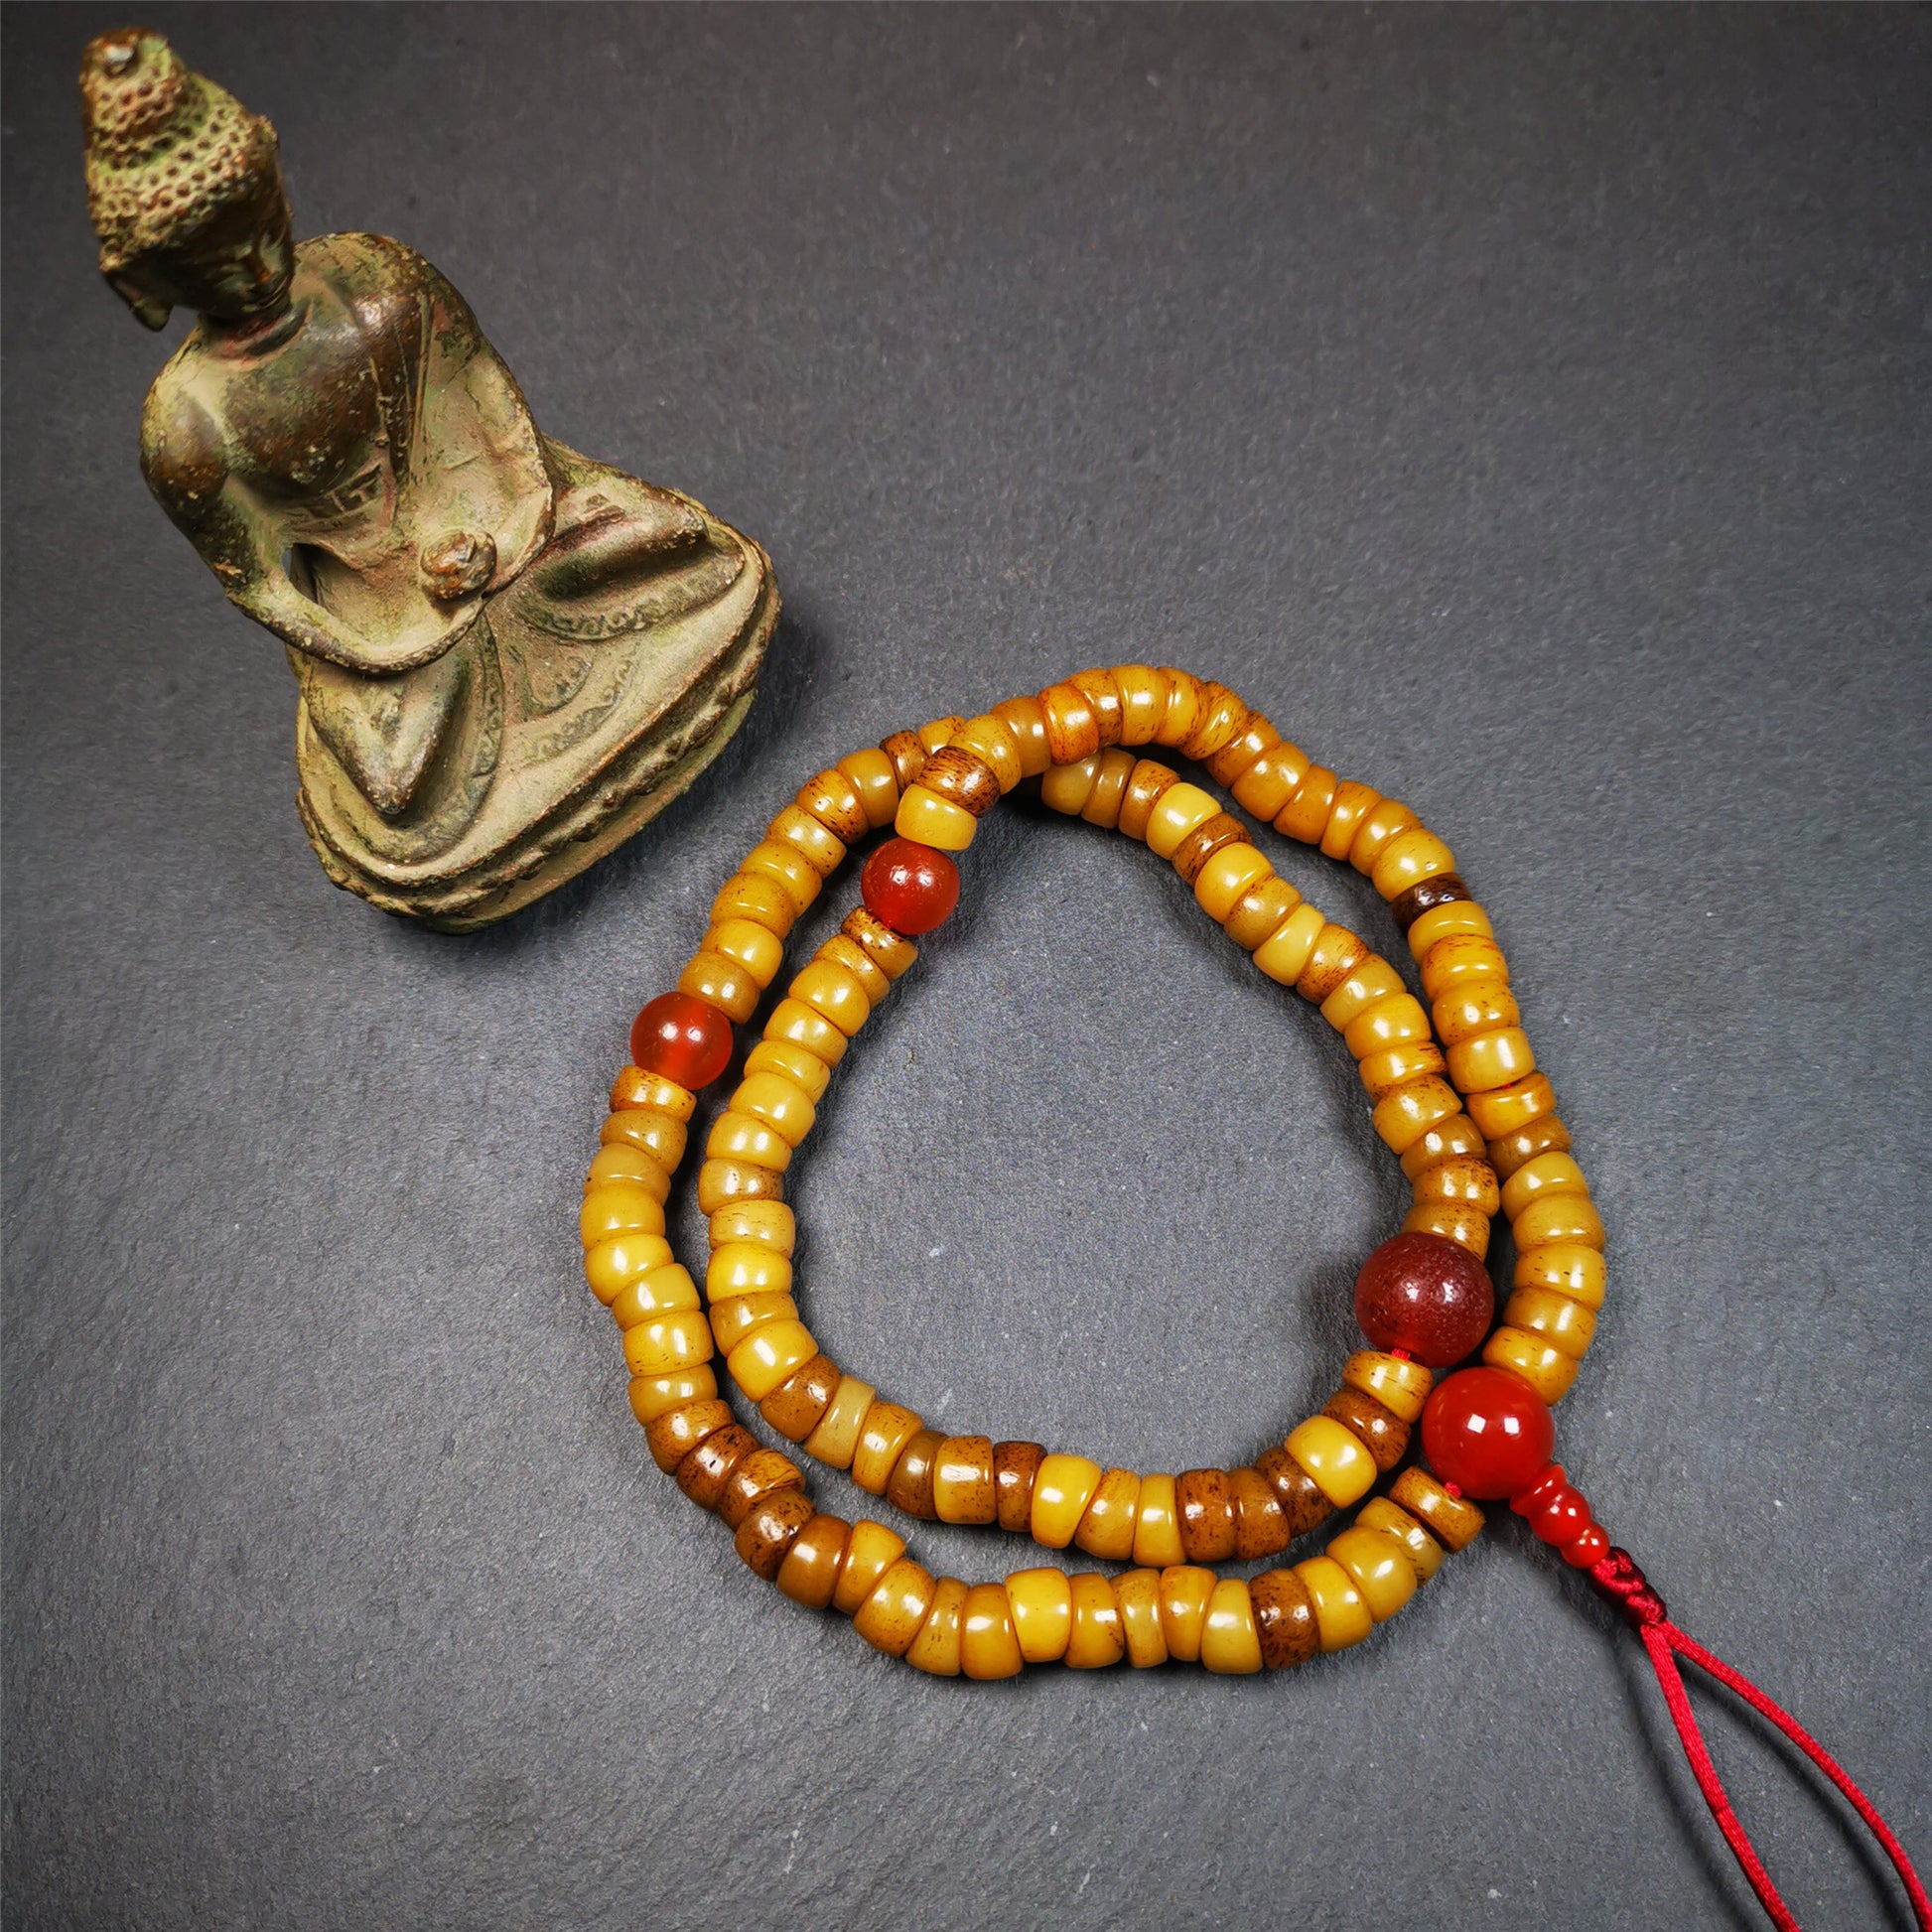 This yak bone mala was handmade from tibetan crafts man in Baiyu County,about 30 years old. It's composed of 108 pcs bevel cut 8mm yak bone beads,with agate beads,guru bead.